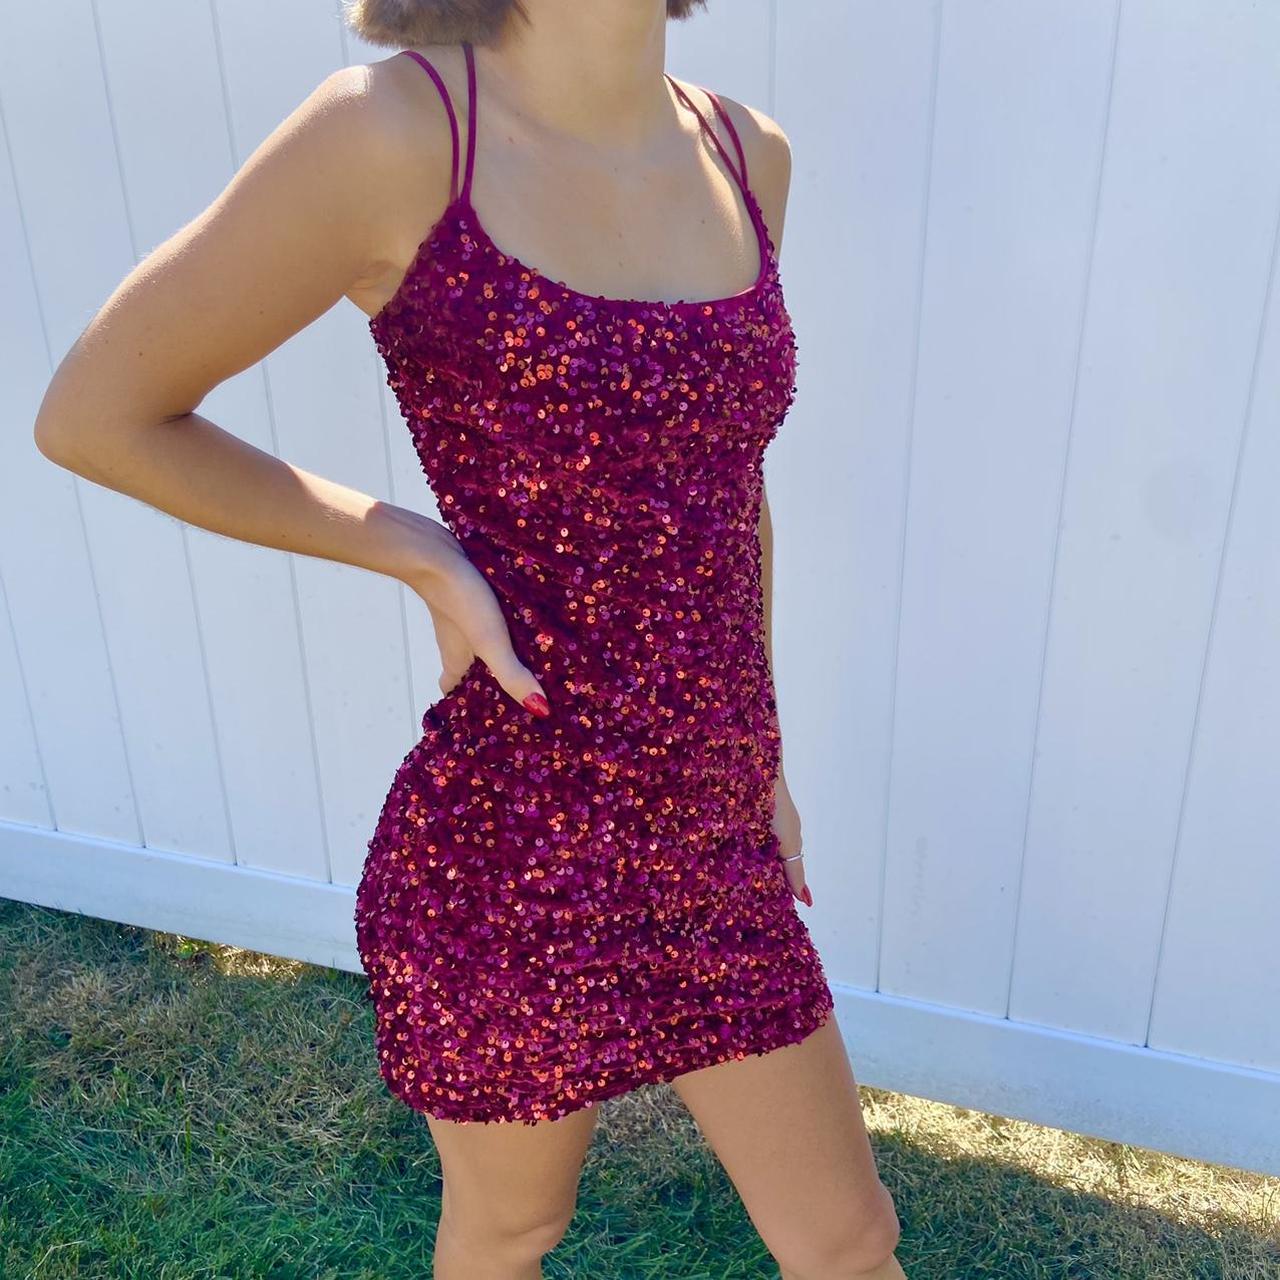 Sexy Bodycon Red Sequin Mini Dress This Lucy In The Depop 